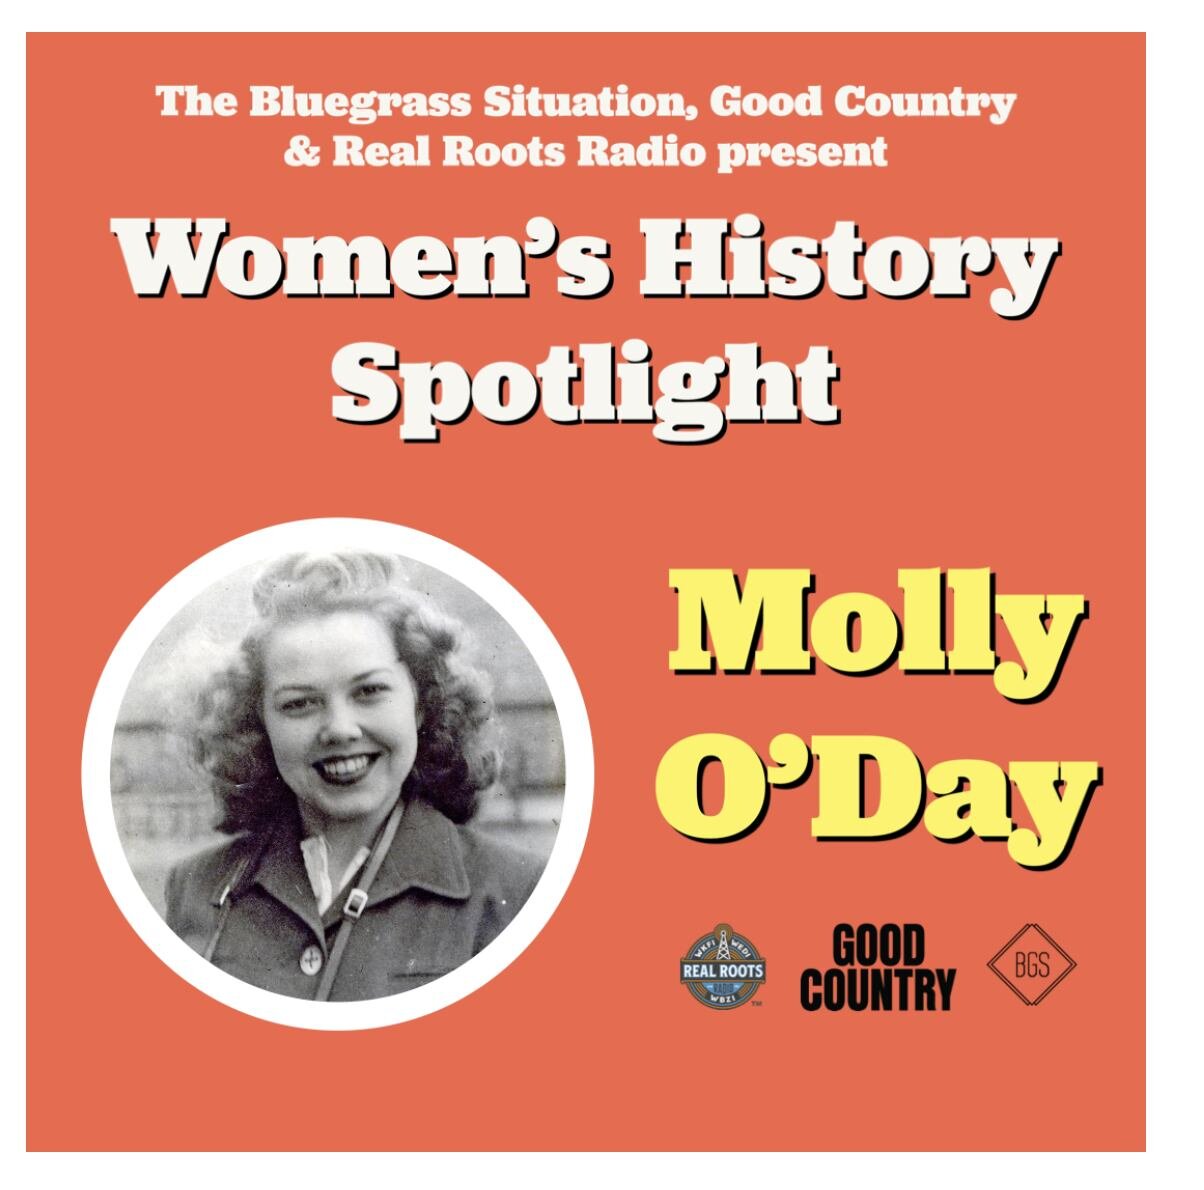 Born Lois LaVerne Williamson, country pioneer Molly O&rsquo;Day was born in Pike County, Kentucky. She would become a popular radio star in West Virginia by the early 1940s, eventually leading Molly O&rsquo;Day &amp; The Cumberland Mountain Folks. He